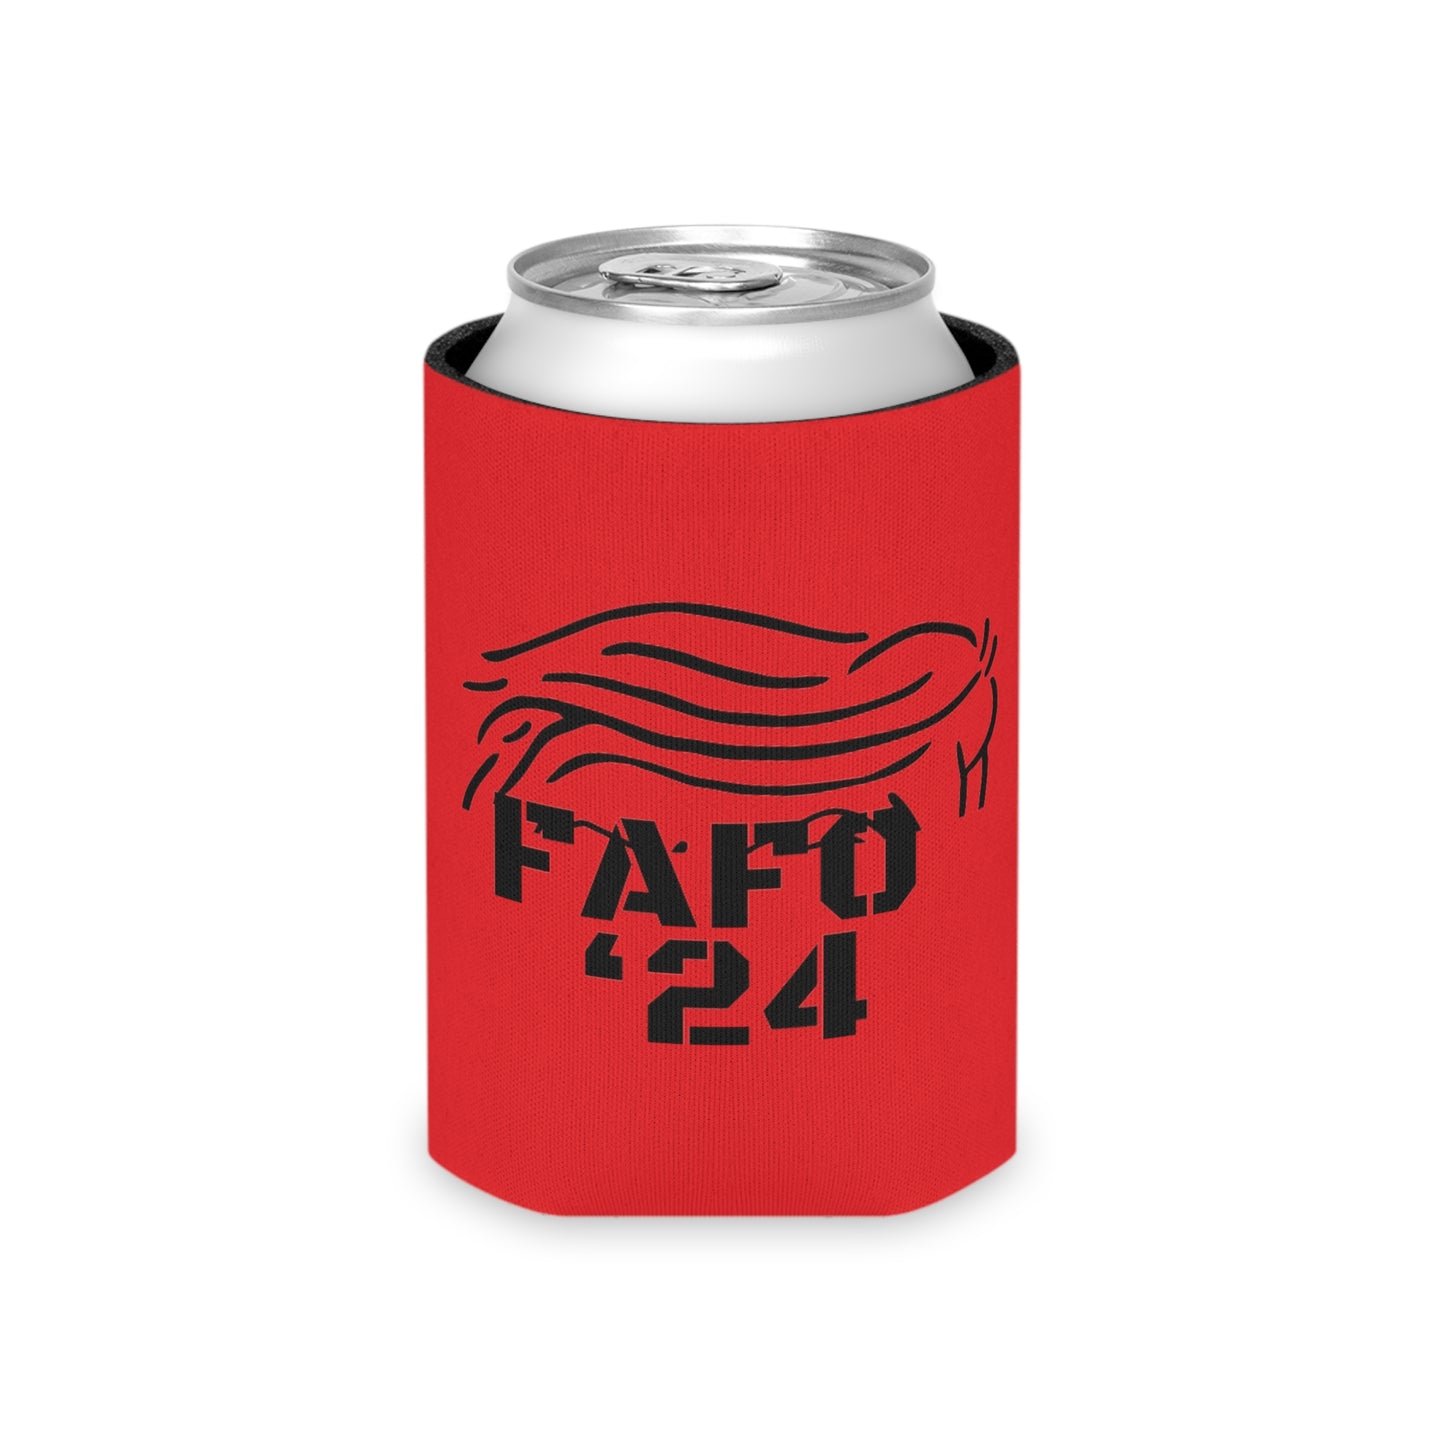 TRUMP FAFO ‘24 Can Cooler